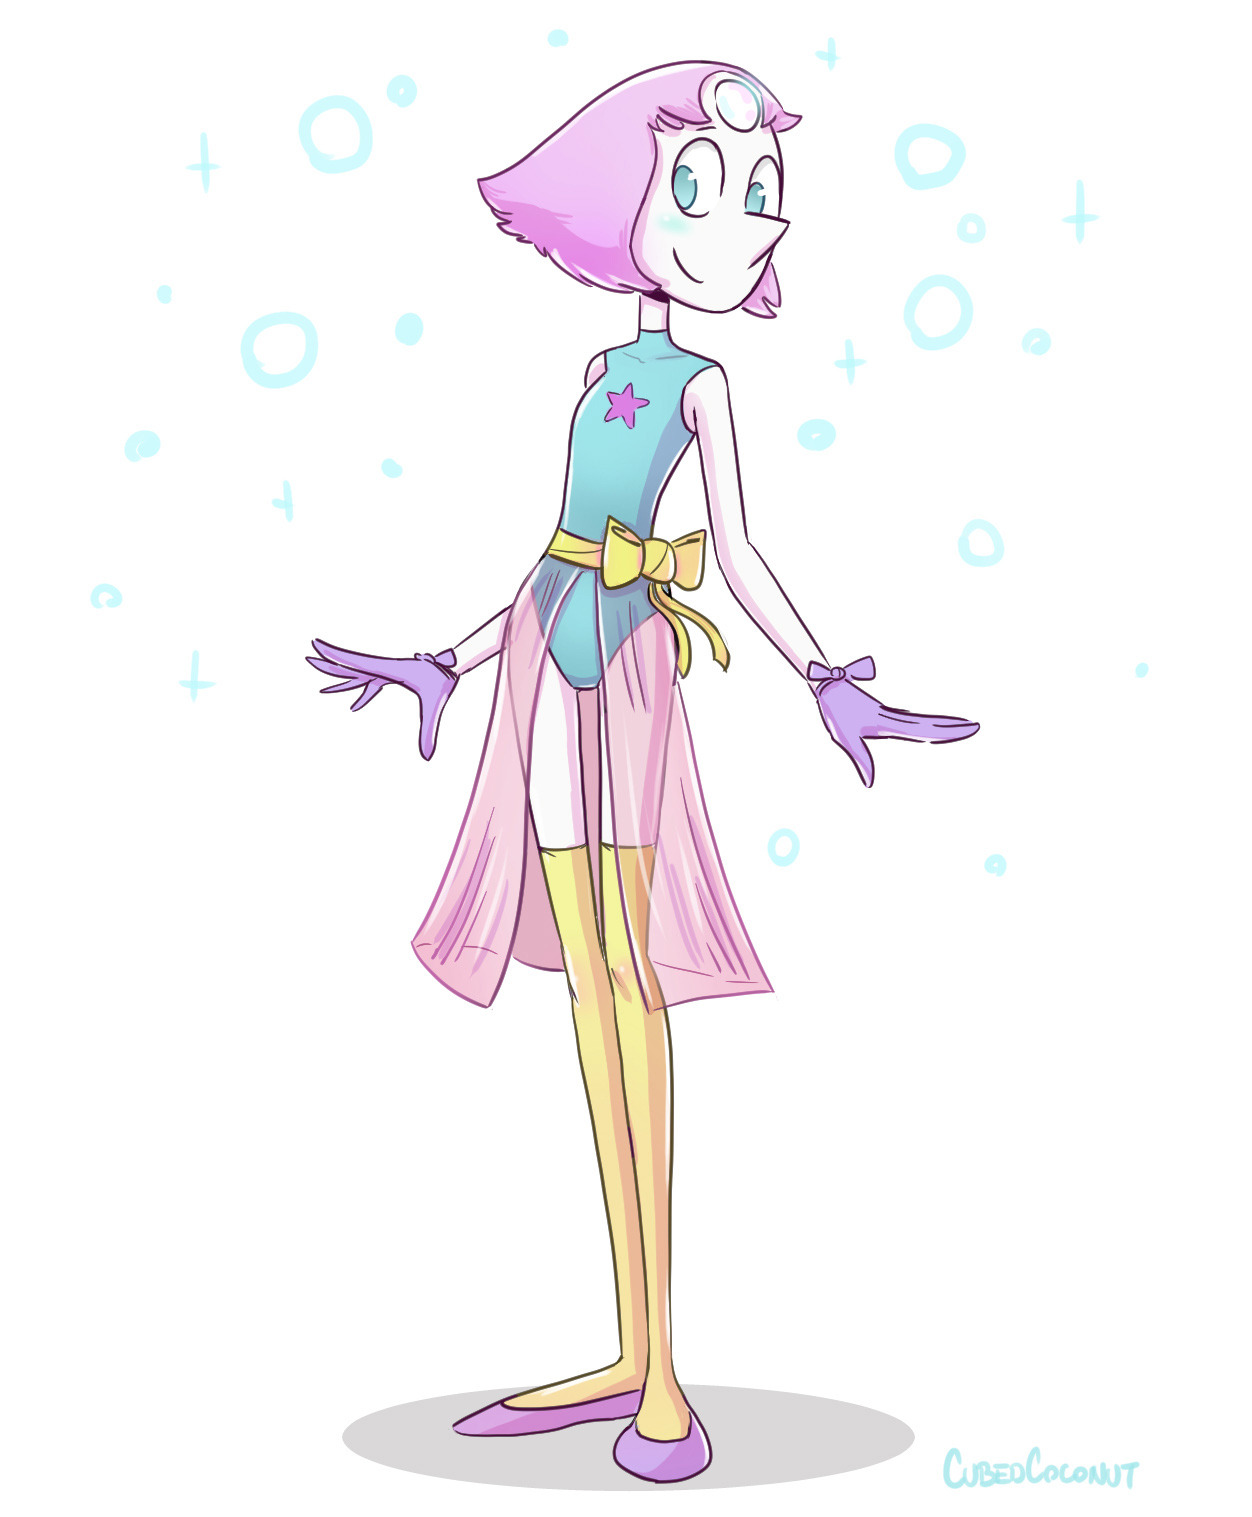 Check out this cute outfit for Pearl designed and commissioned by @perle-insoumiseI